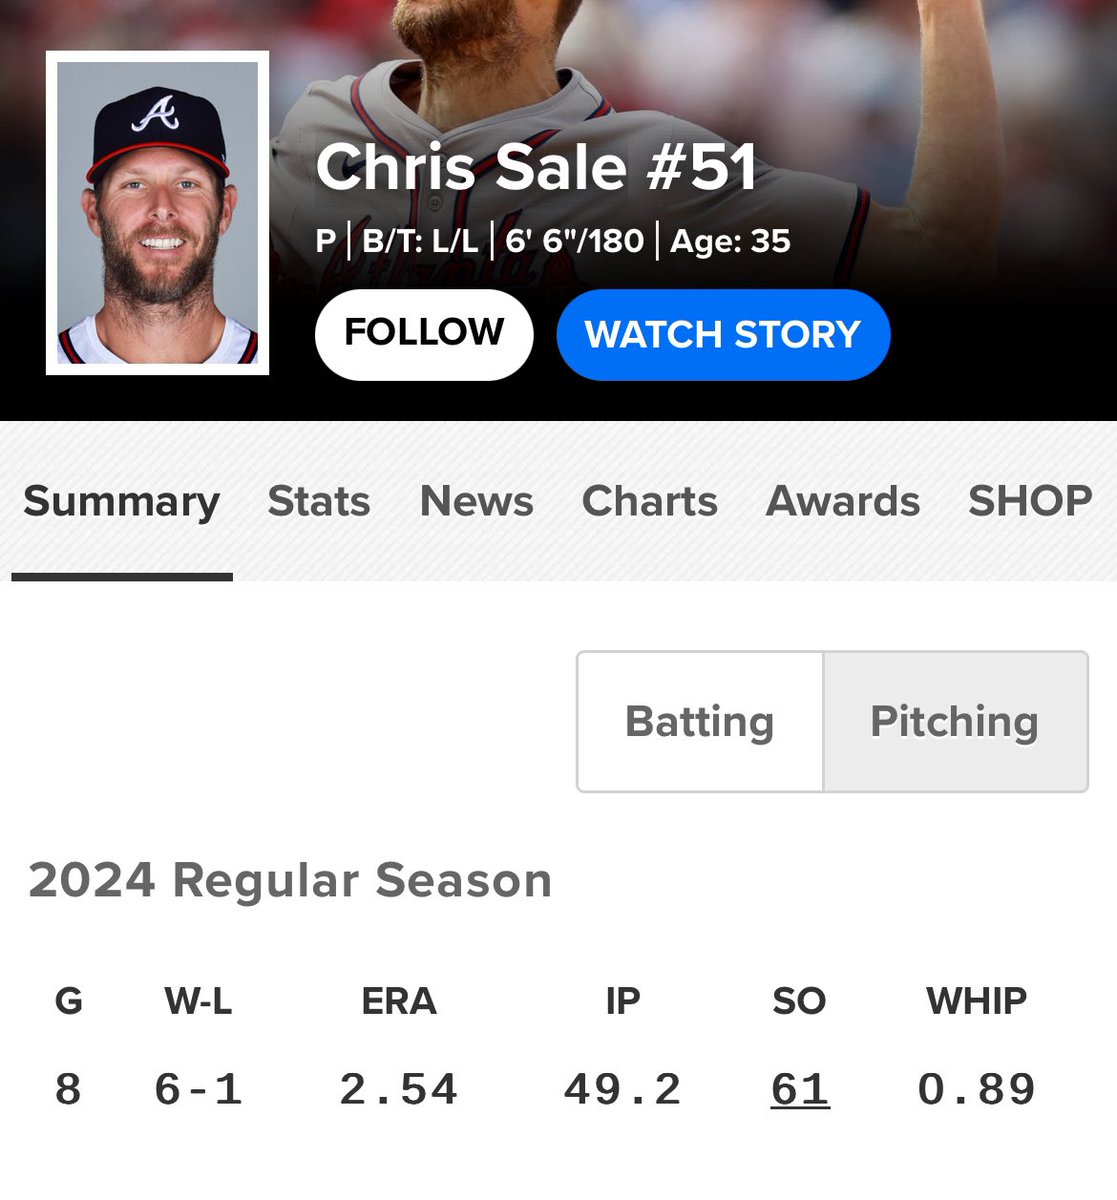 So Chris Sale is just an ace-caliber pitcher again huh